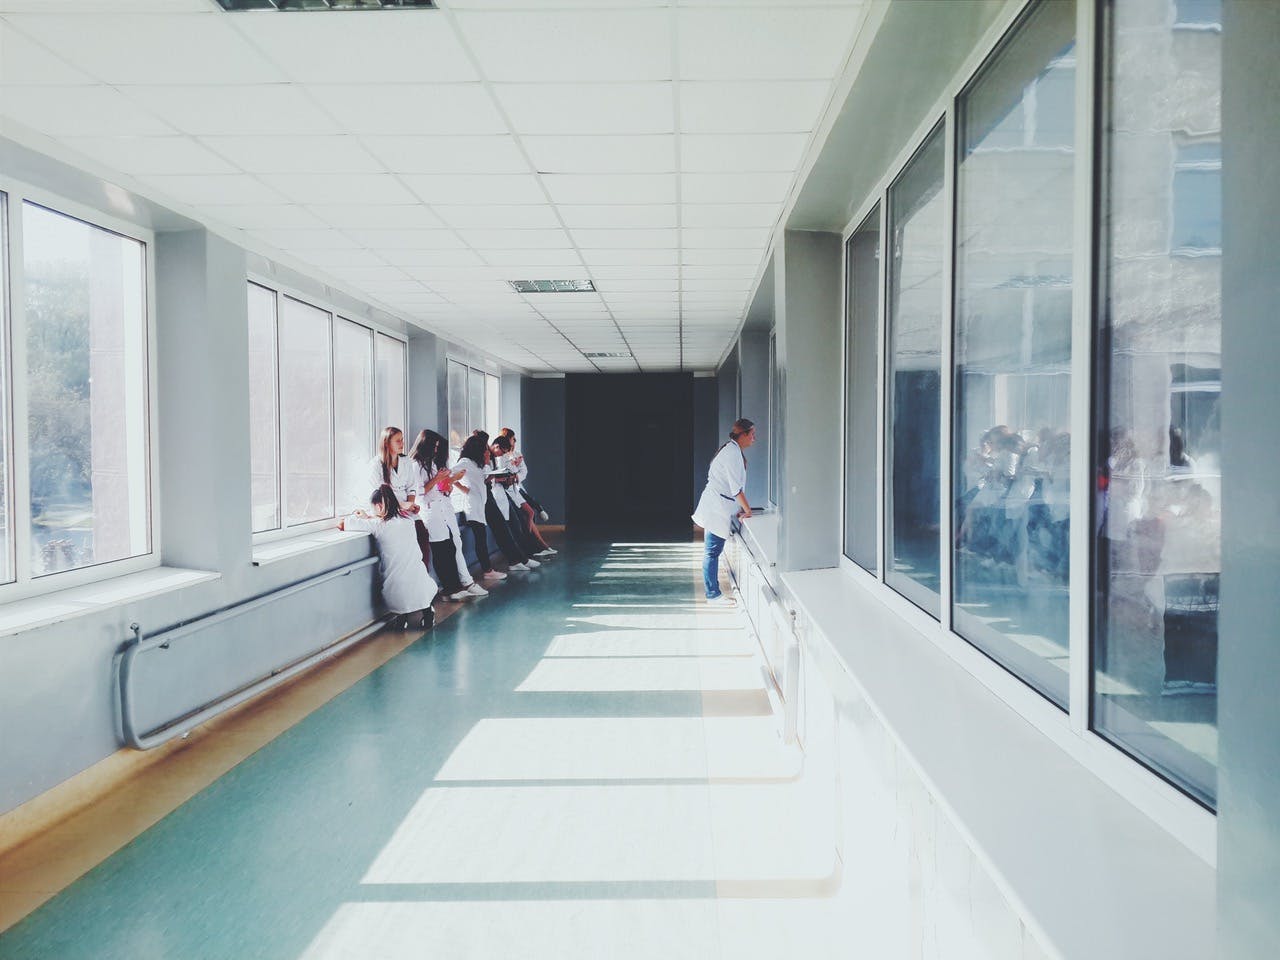 Eight people in white coats lean against a sunlit hallway's large windows, while one person stands on the right side.